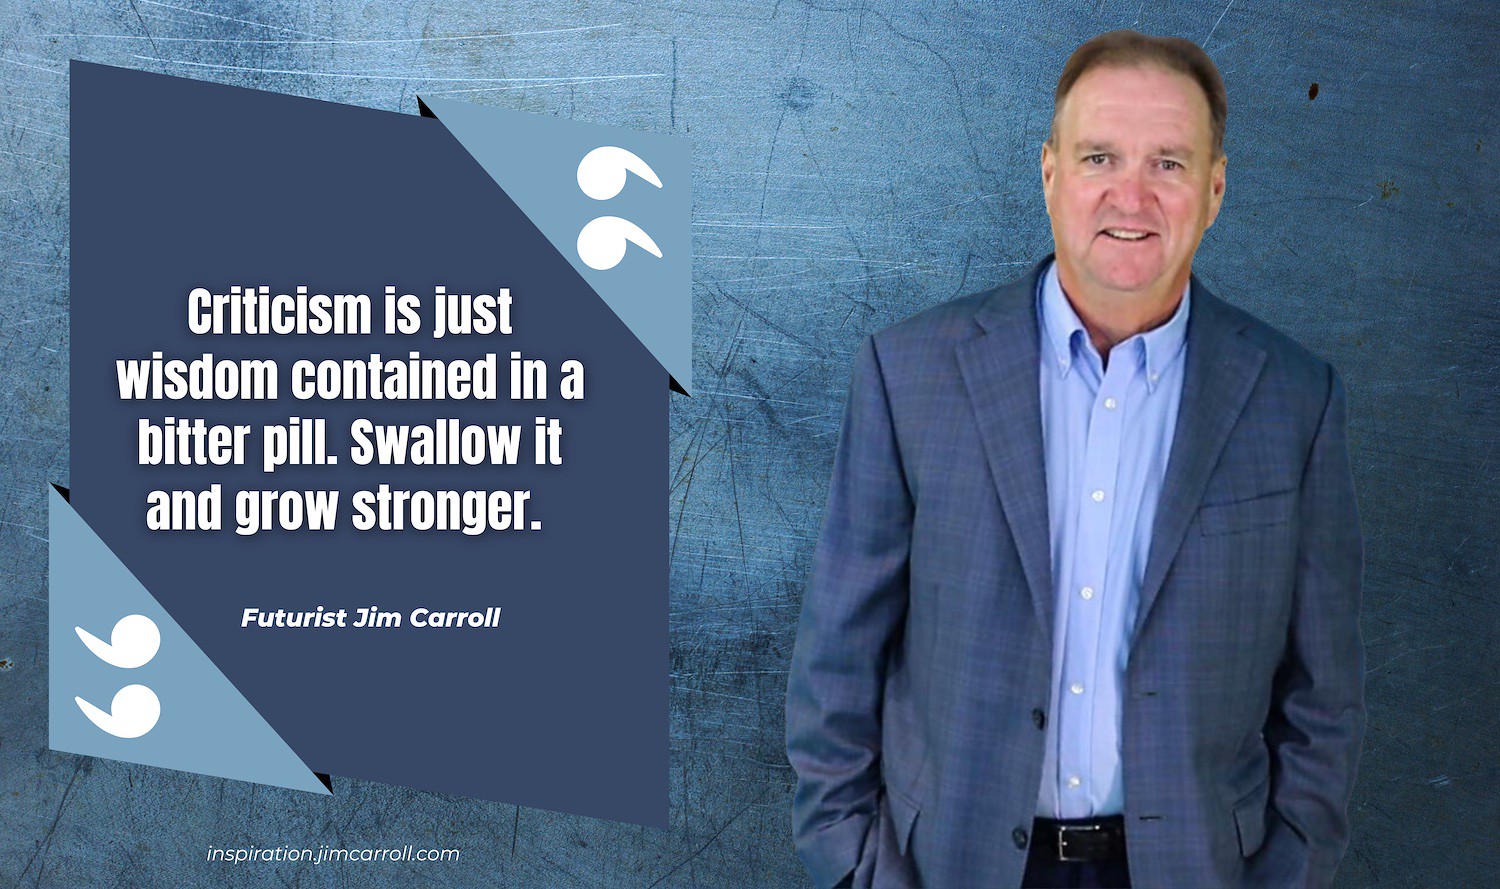 "Criticism is just wisdom contained in a bitter pill. Swallow it and grow stronger" - Futurist Jim Carroll